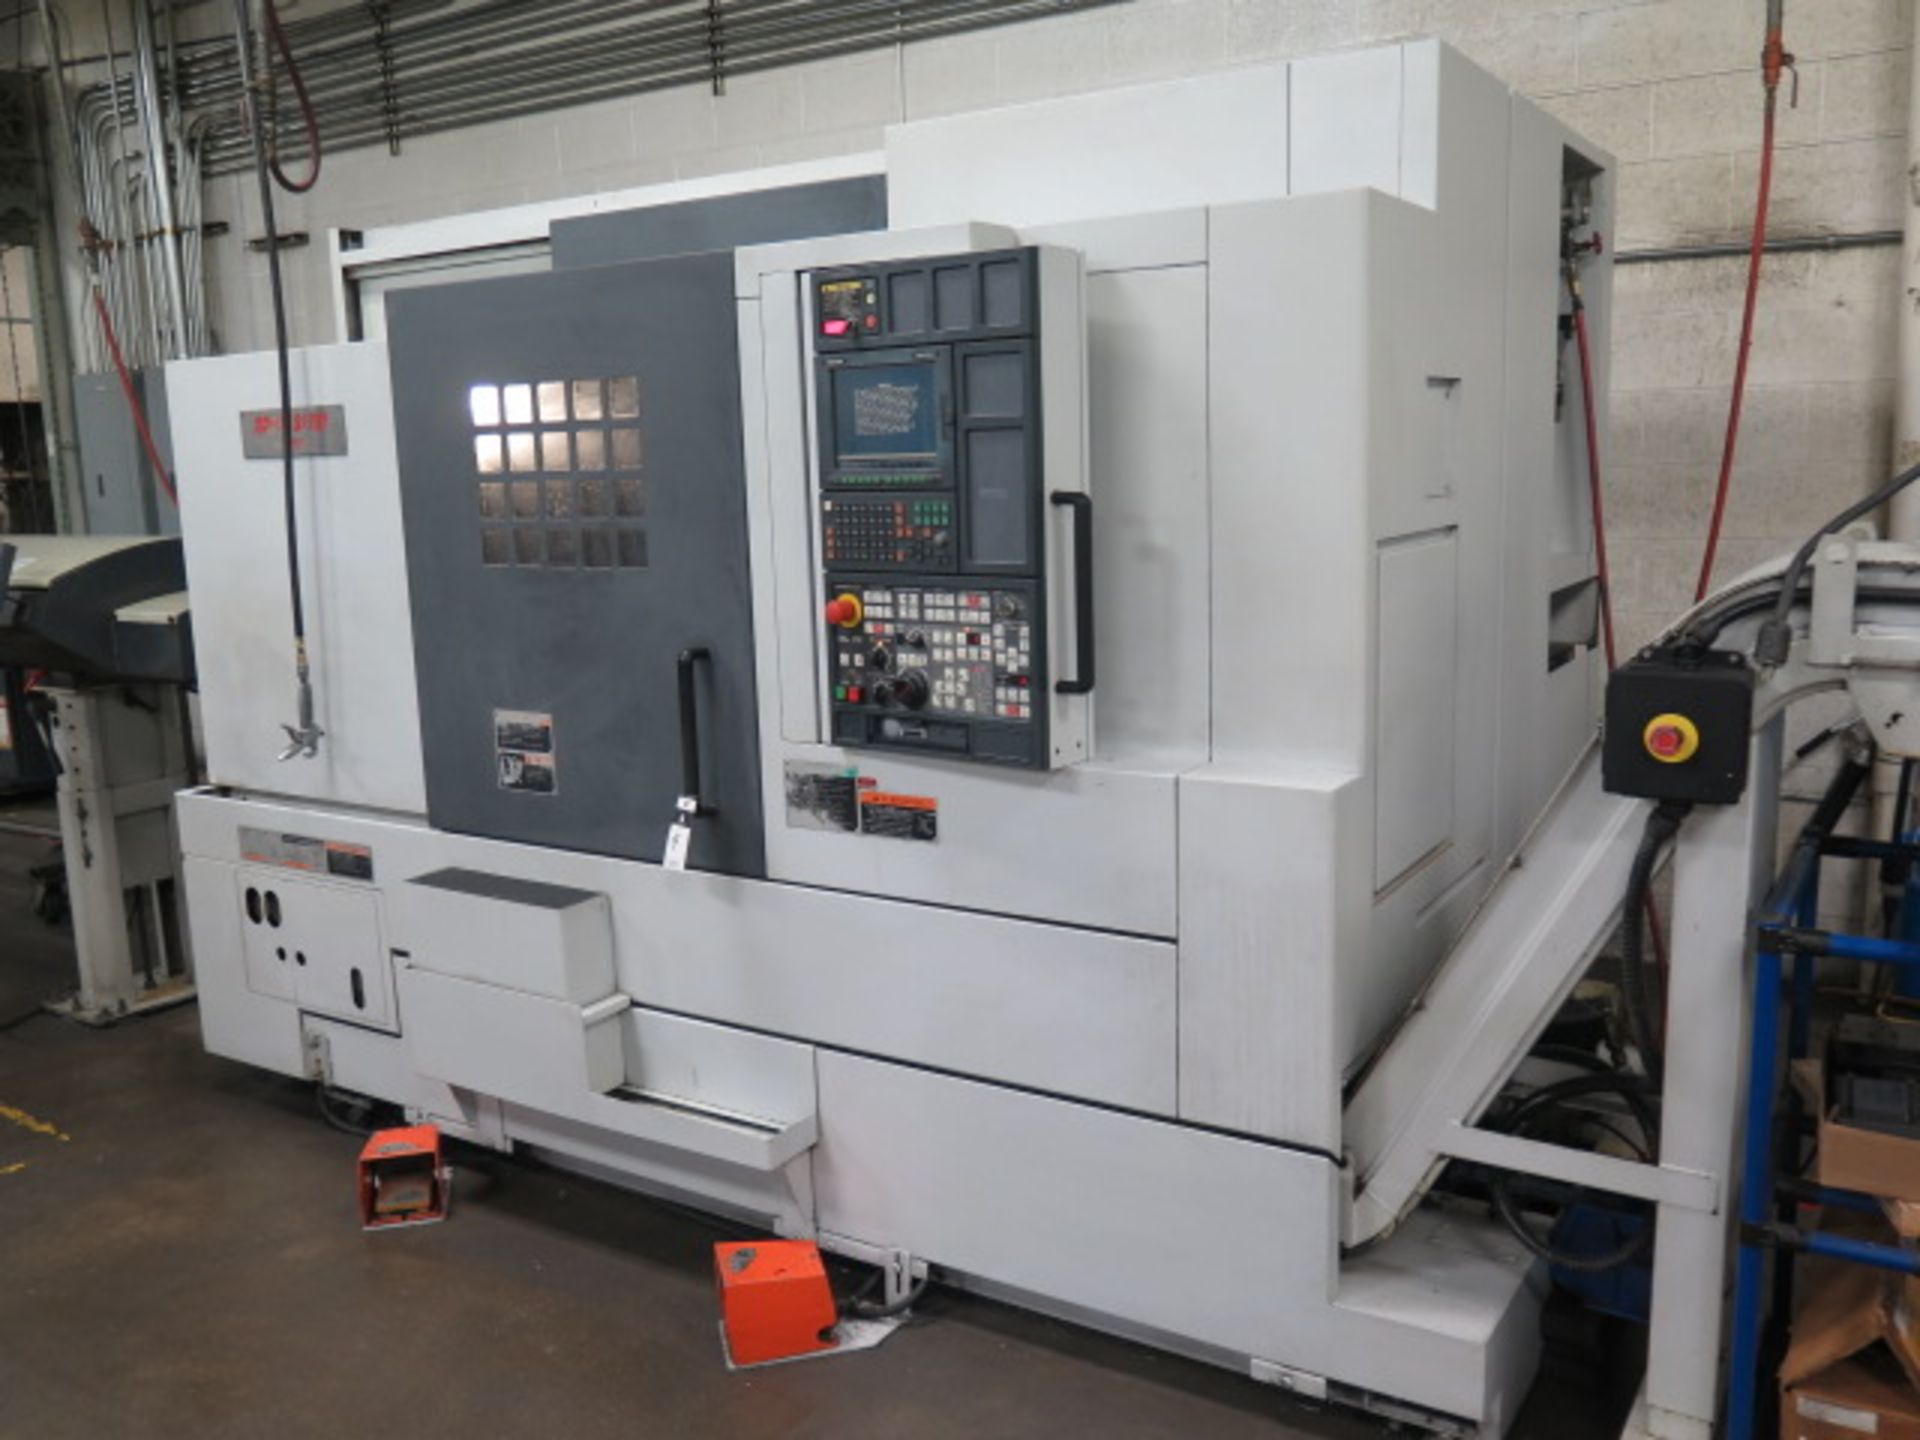 2005 Mori Seiki NL2500SY/700 Twin Spindle Live Turret CNC Turning Center s/n NL251FL2626,SOLD AS IS - Image 2 of 17